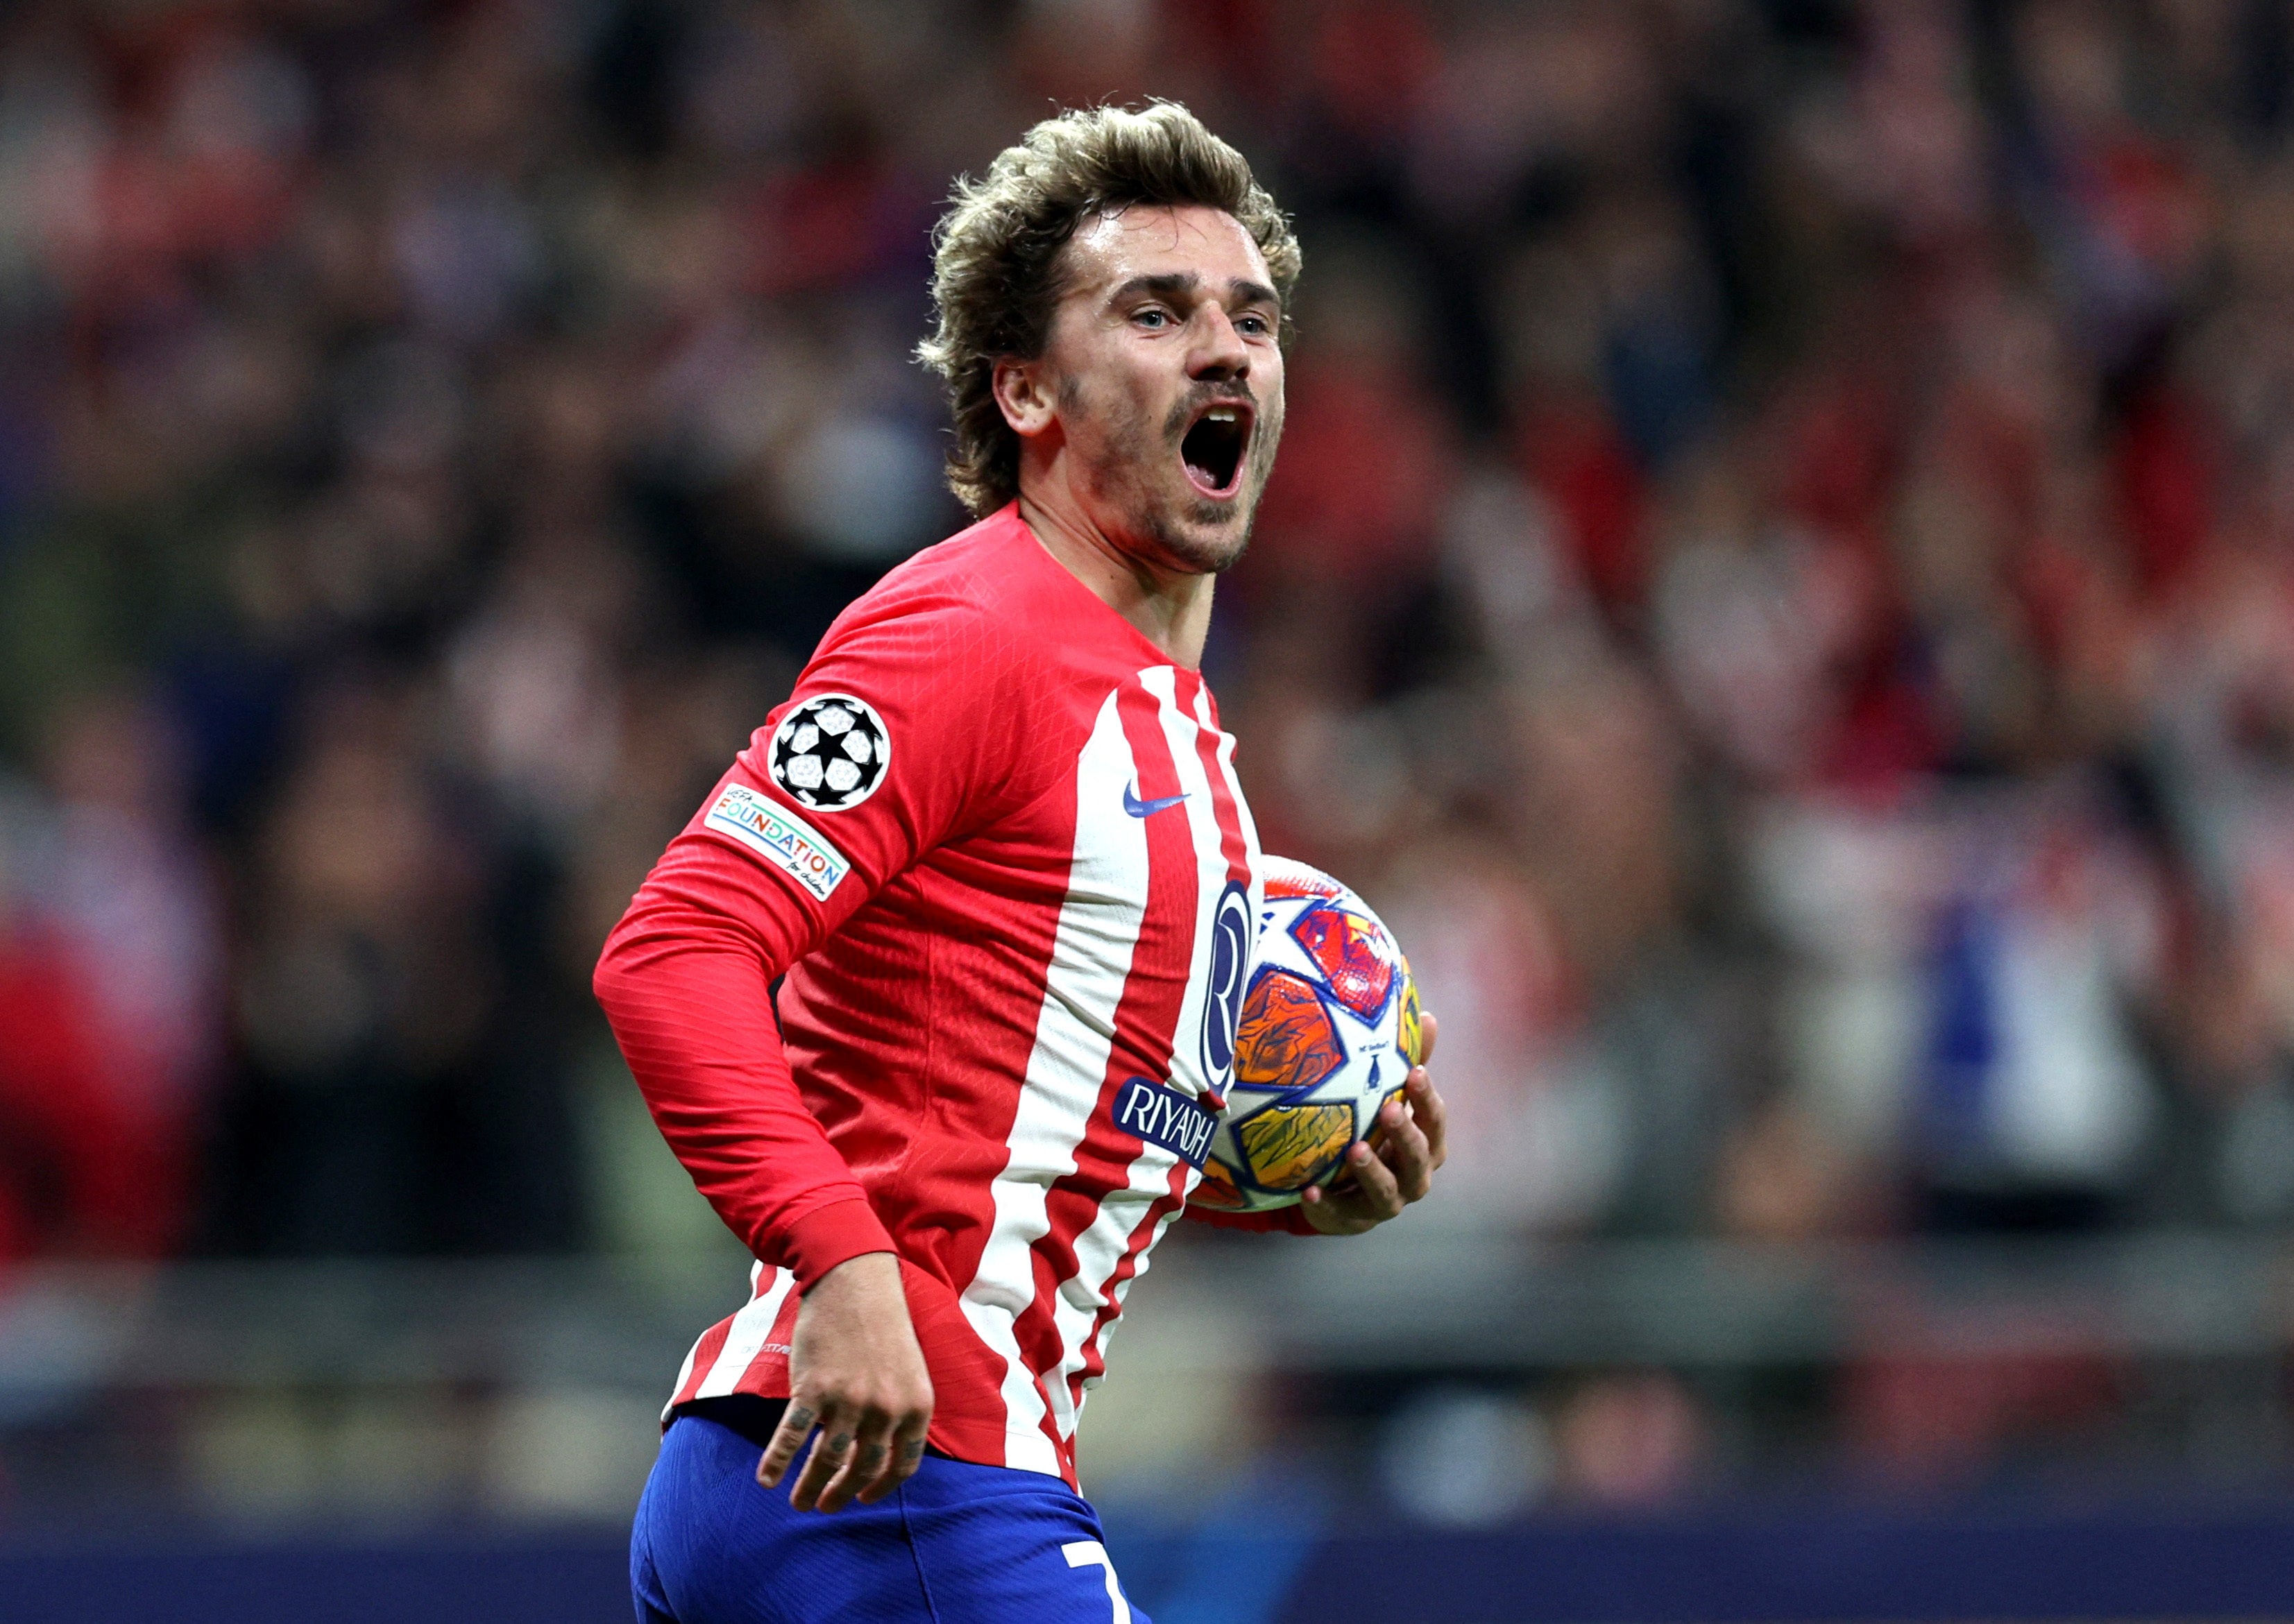 Griezmann pulled one back immediately after Dimarco’s opener